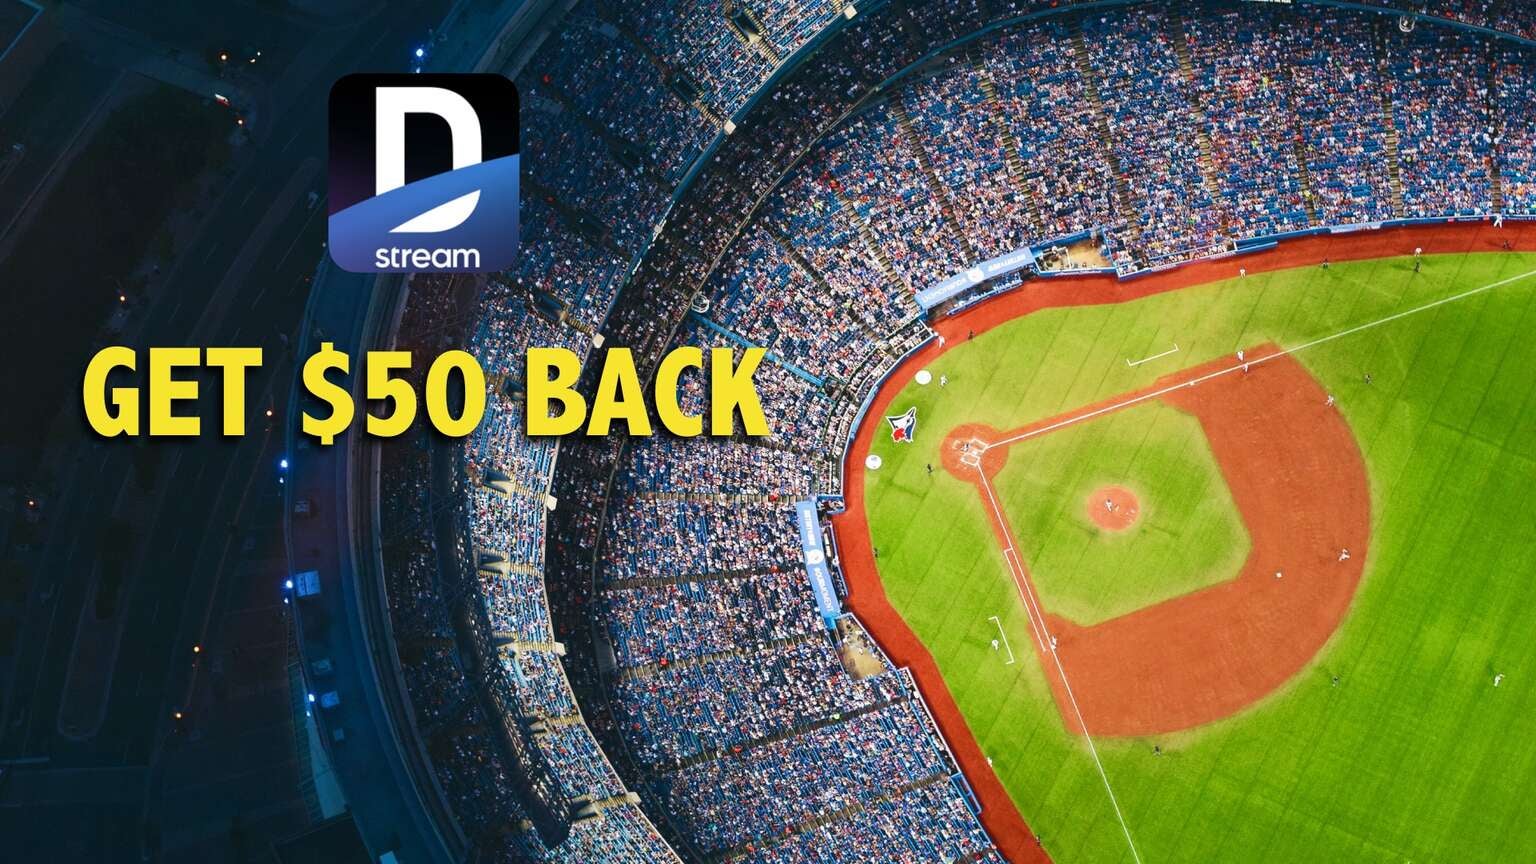 Exclusive Deal Get 50 Back on DIRECTV STREAM to Stream Your Favorite